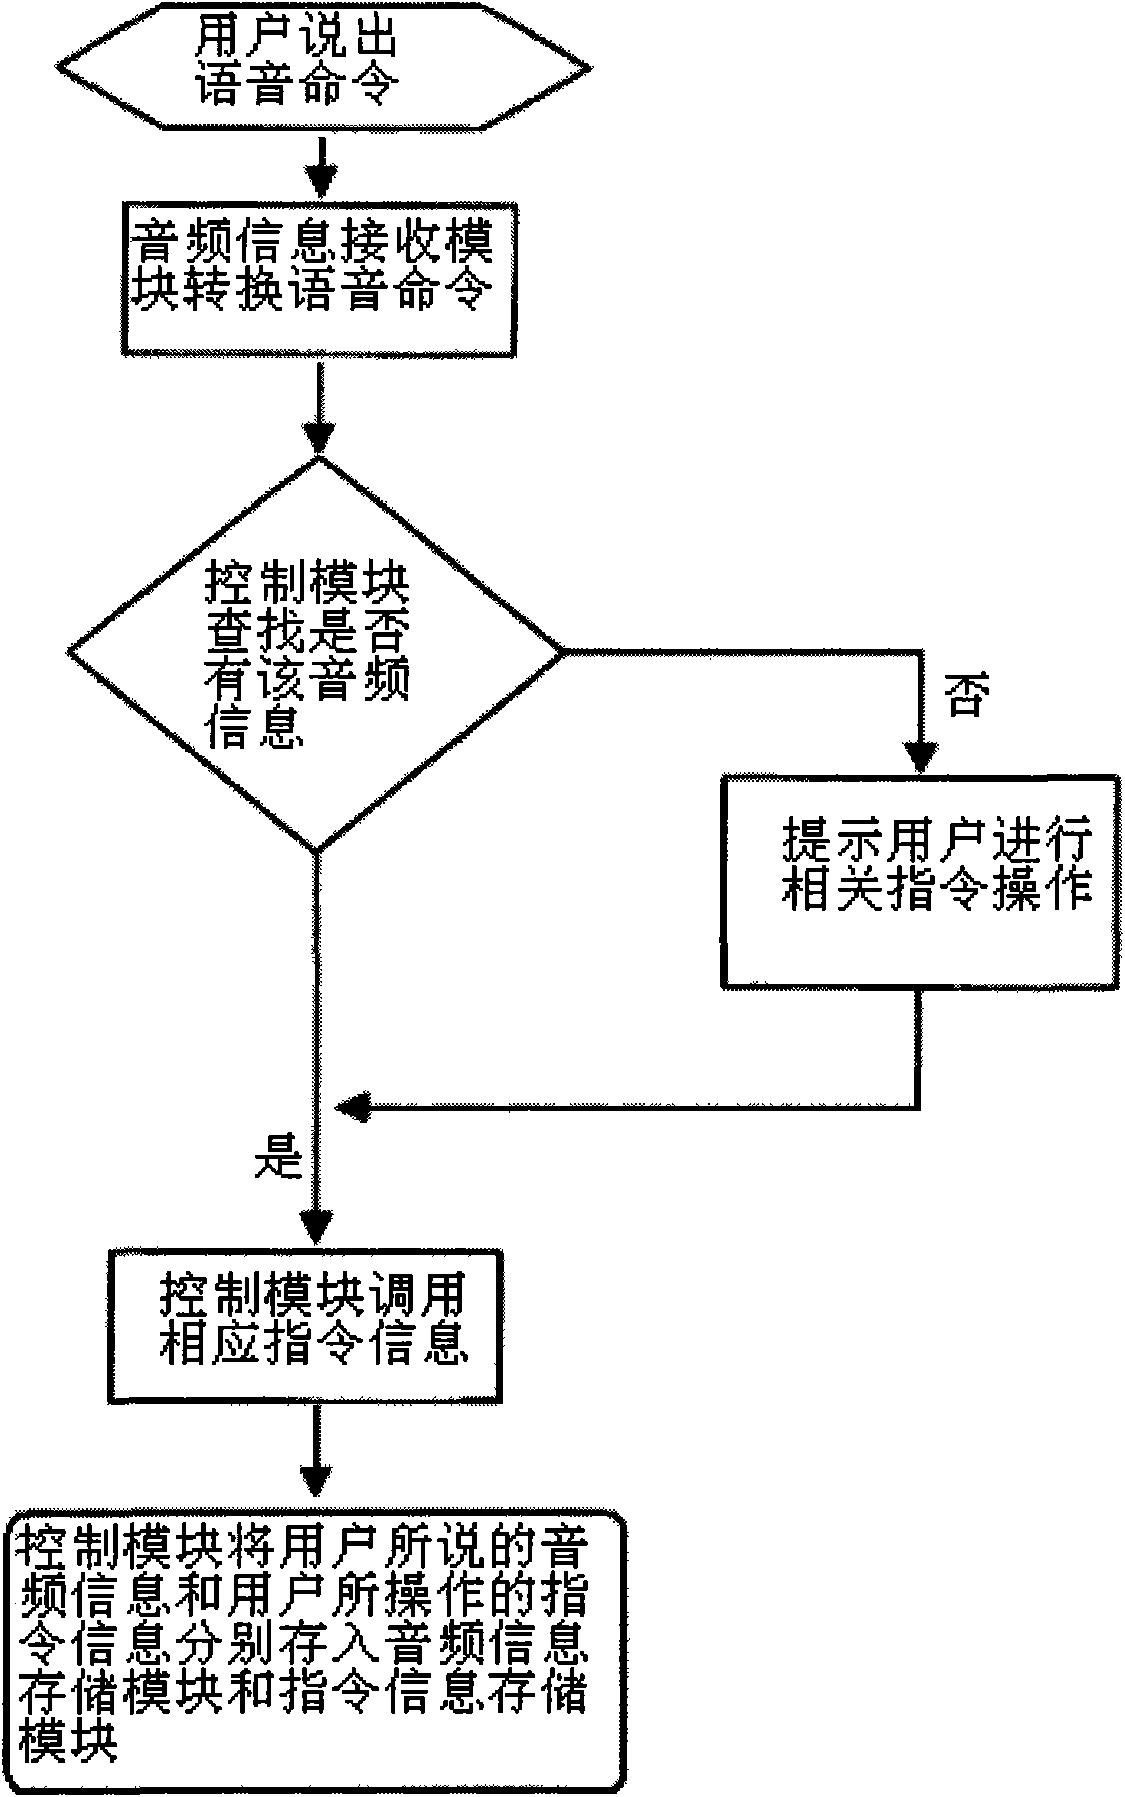 Speech recognition network multimedia player system and method